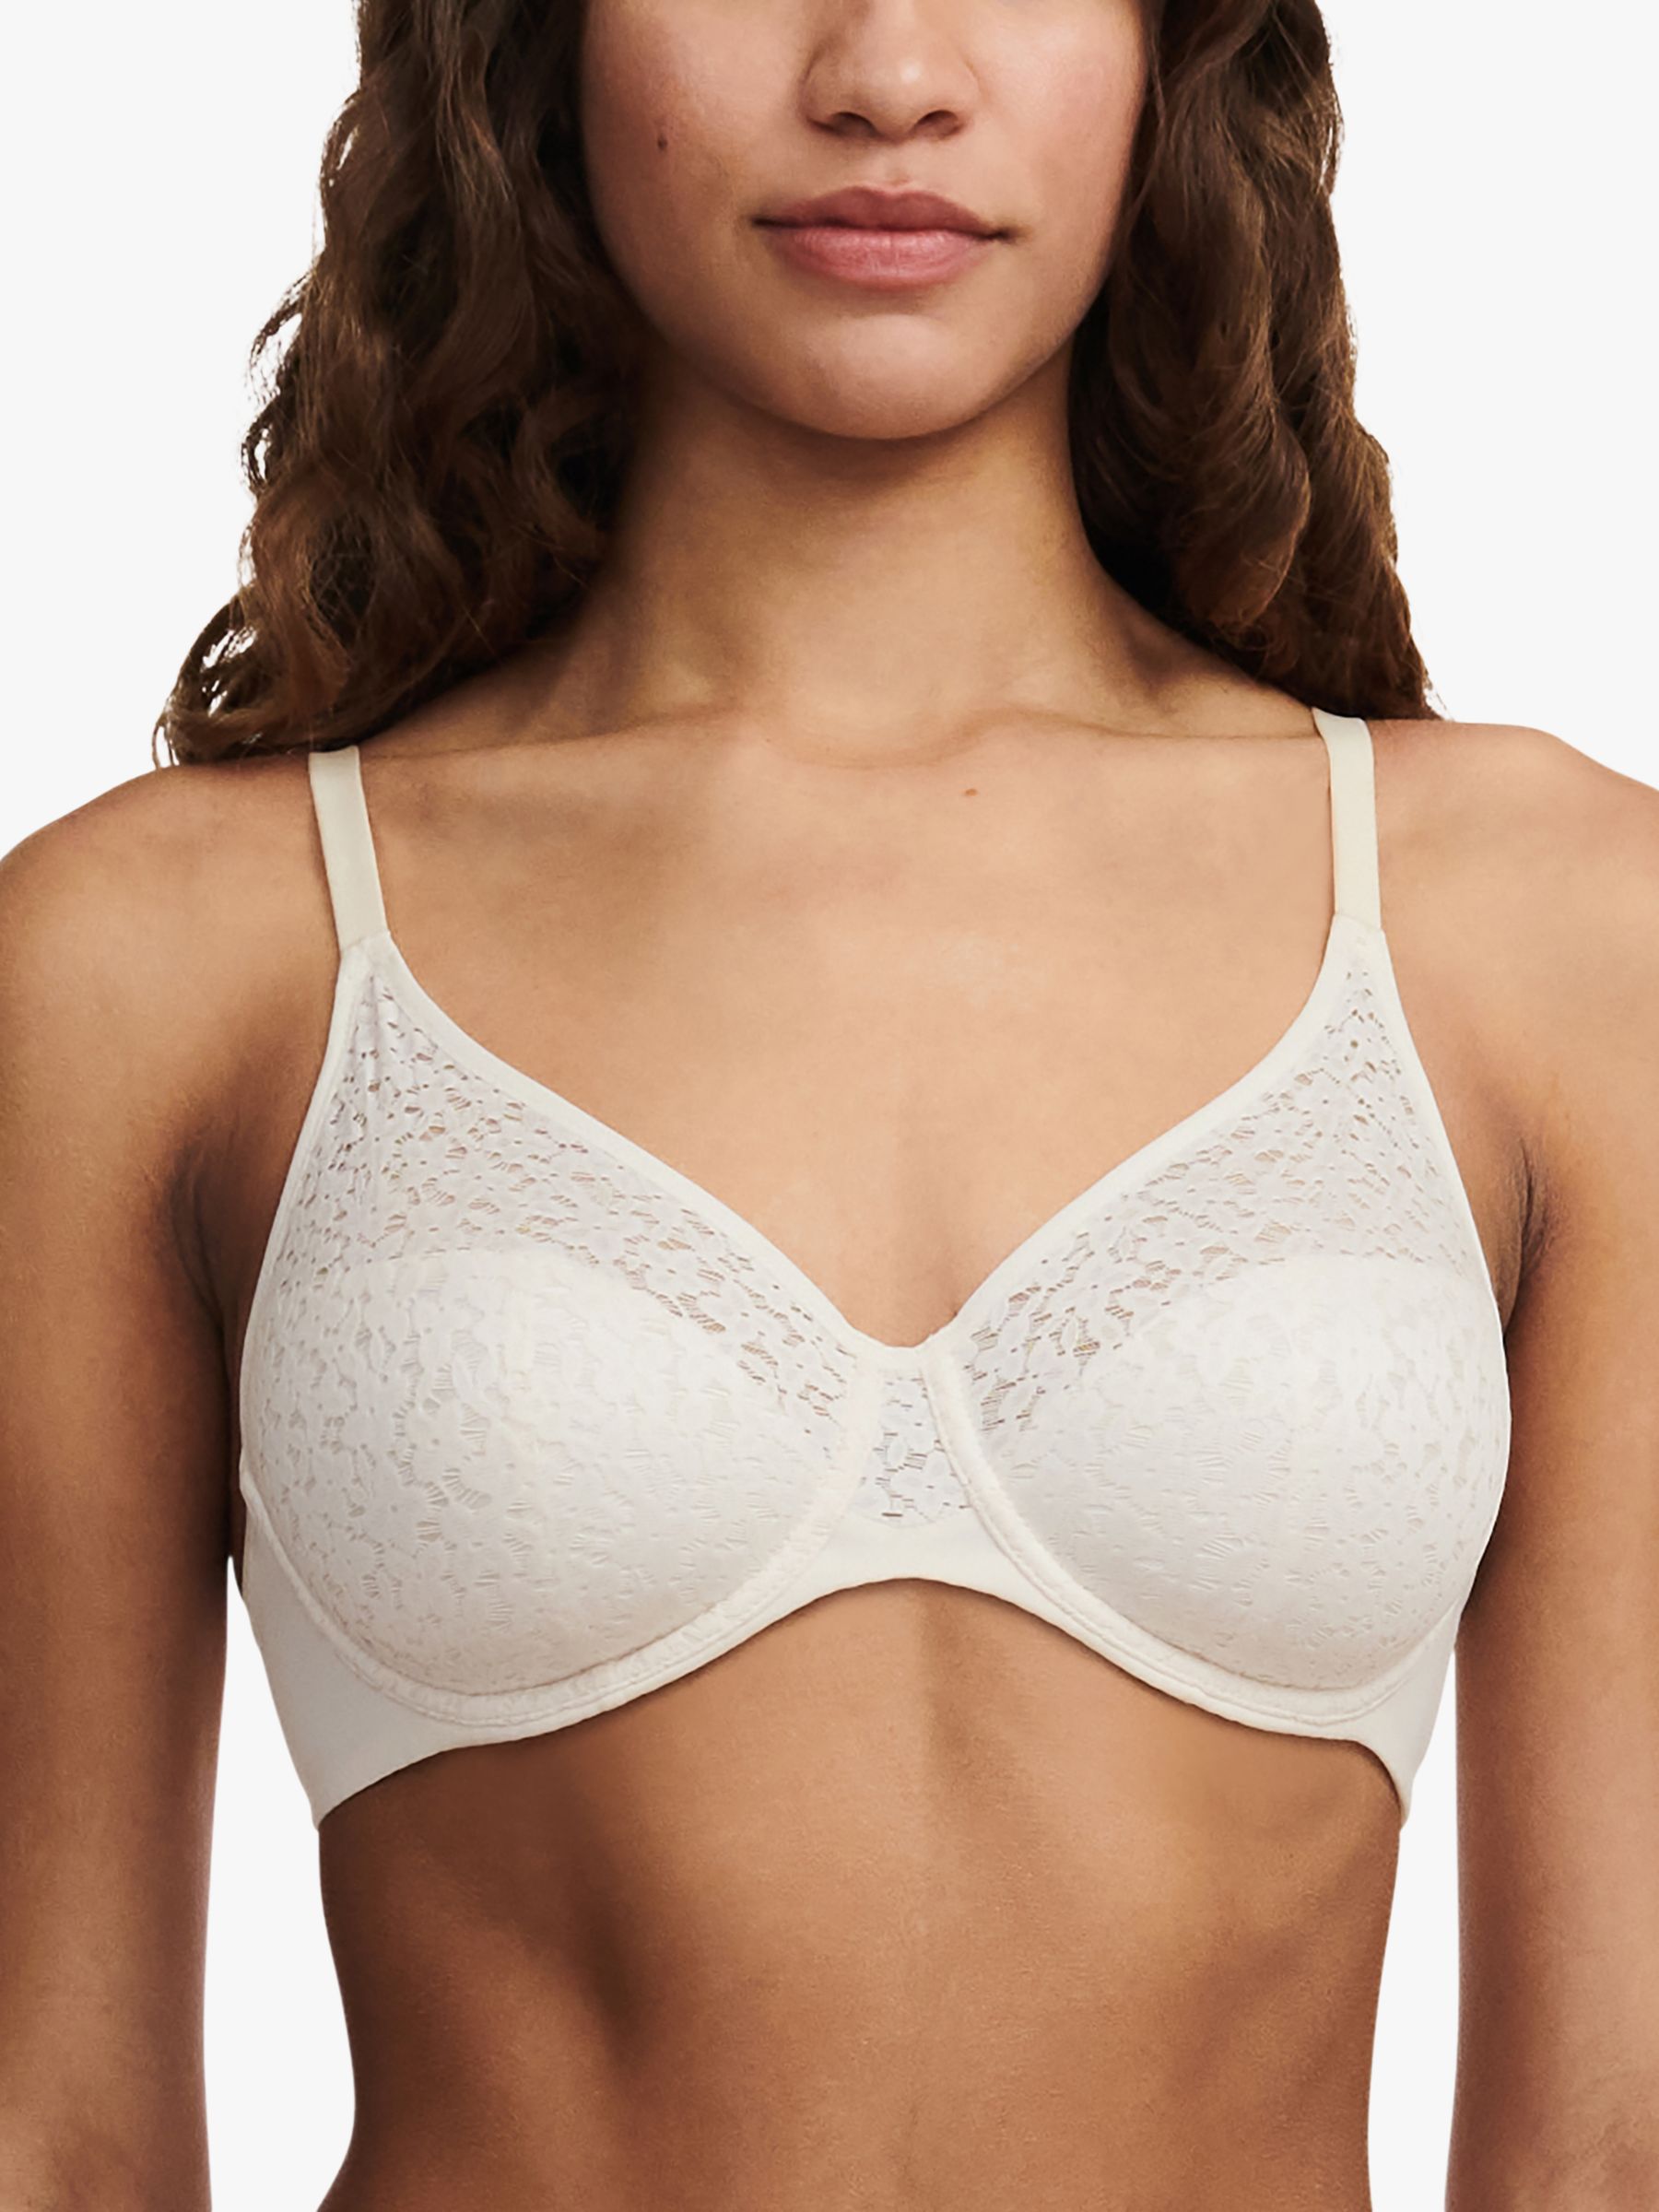 Embleme Soft Cup Triangle Bra - Golden Yellow